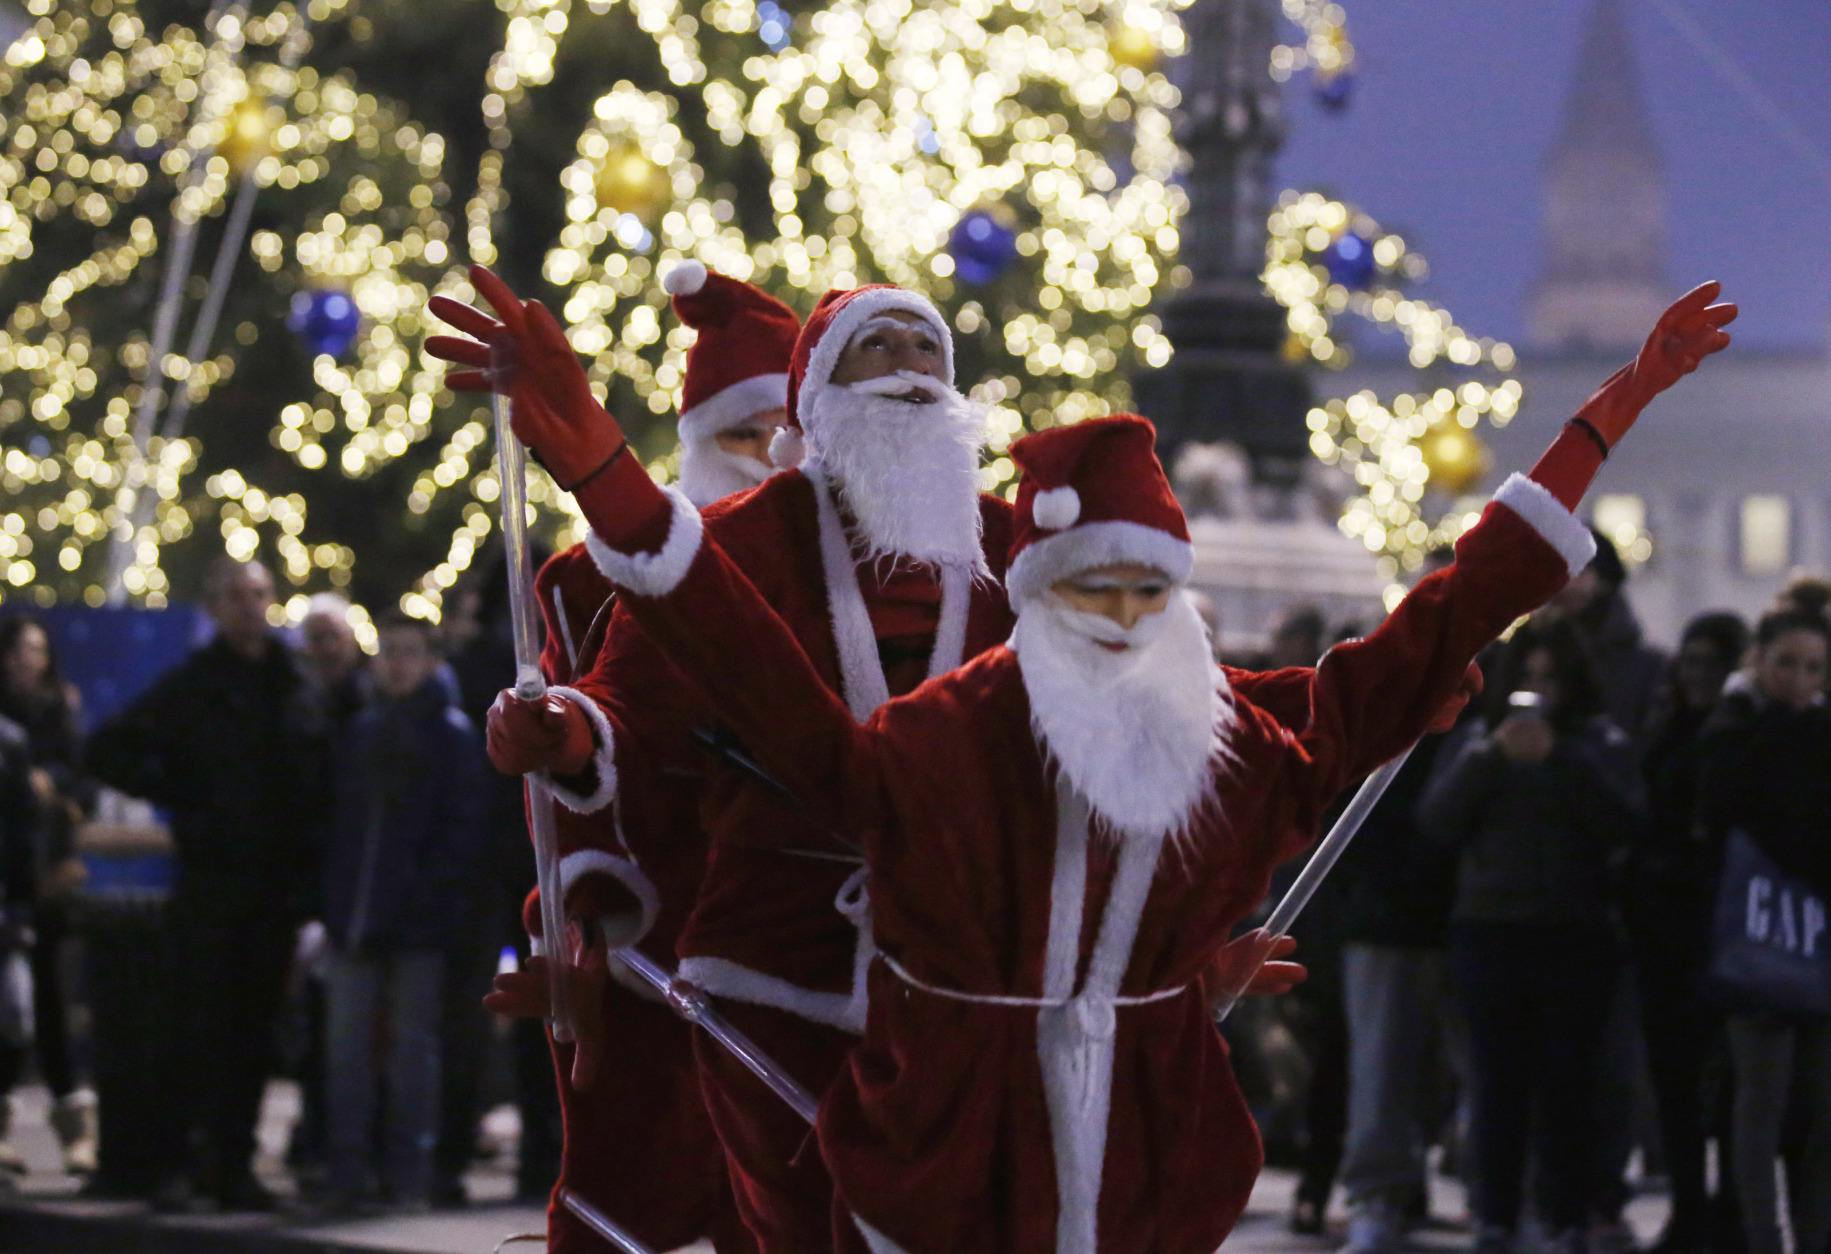 A street artist performs dressed as Santa Klaus with two life-size puppets in Milan, Italy, Saturday, Dec. 20, 2014. (AP Photo/Luca Bruno)